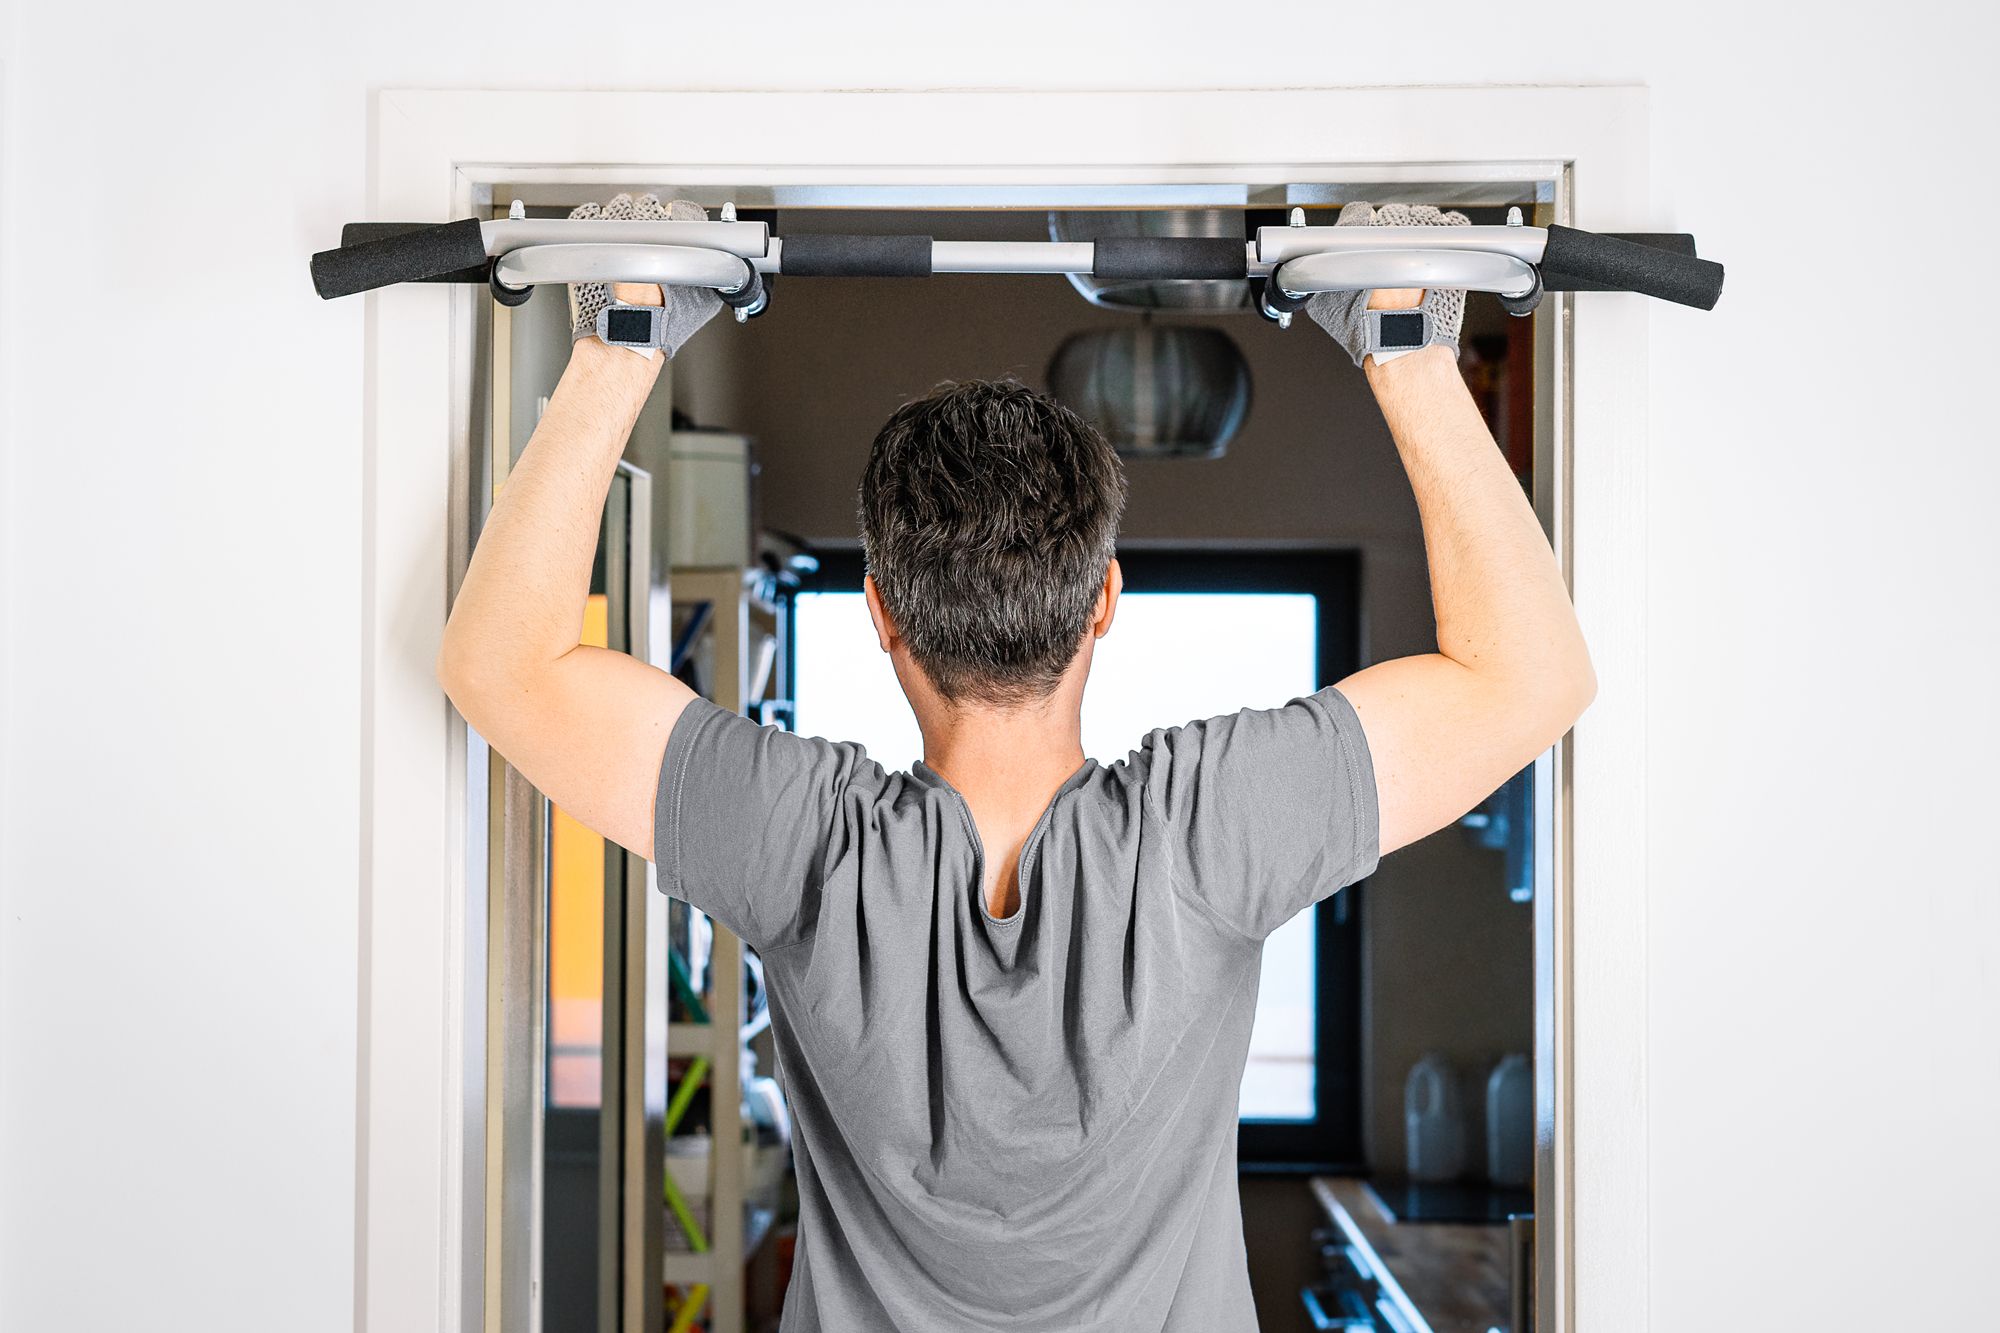 Pull up Bar for Doorway Black Door Pull Up Bar Chin Up Bar High Density Foam Grip Strength Training Pull-up Bars Iron Gym/Home Workout Equipment for Men,Easy-to-Install Exercise/Workout Bar